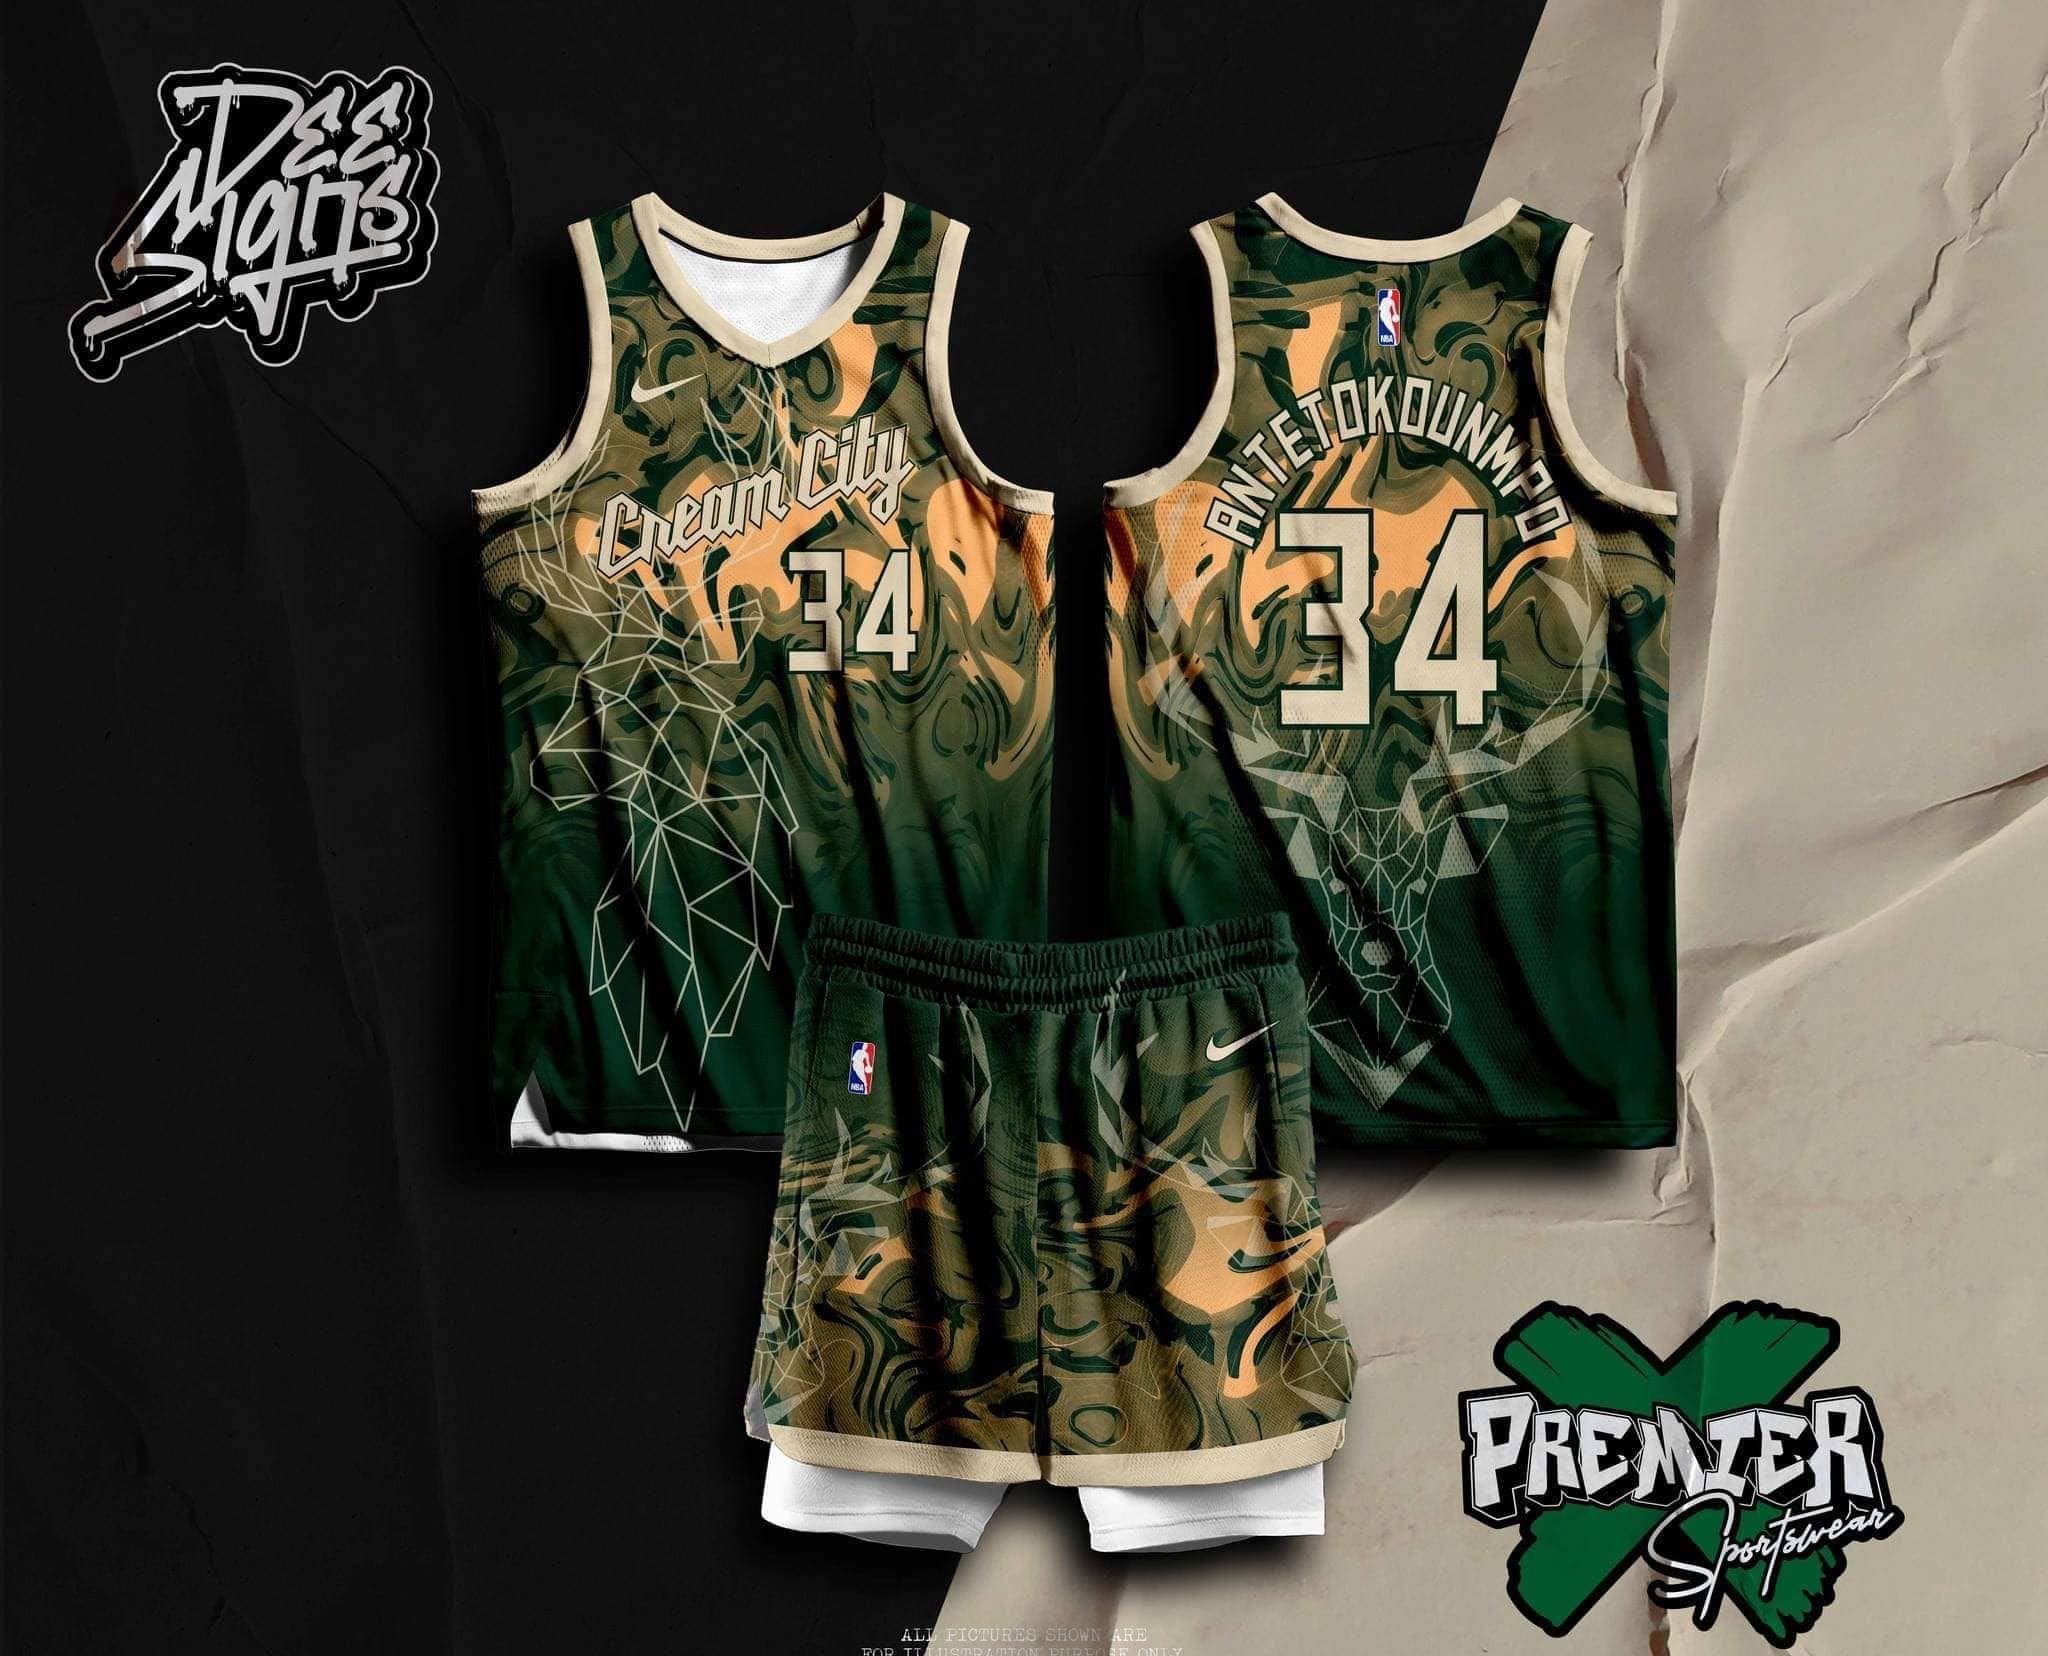 NEW BASKETBALL MILWAUKEE 08 BUCKS JERSEY FREE CUSTOMIZE OF NAME AND NUMBER  ONLY full sublimation high quality fabrics/ trending jersey